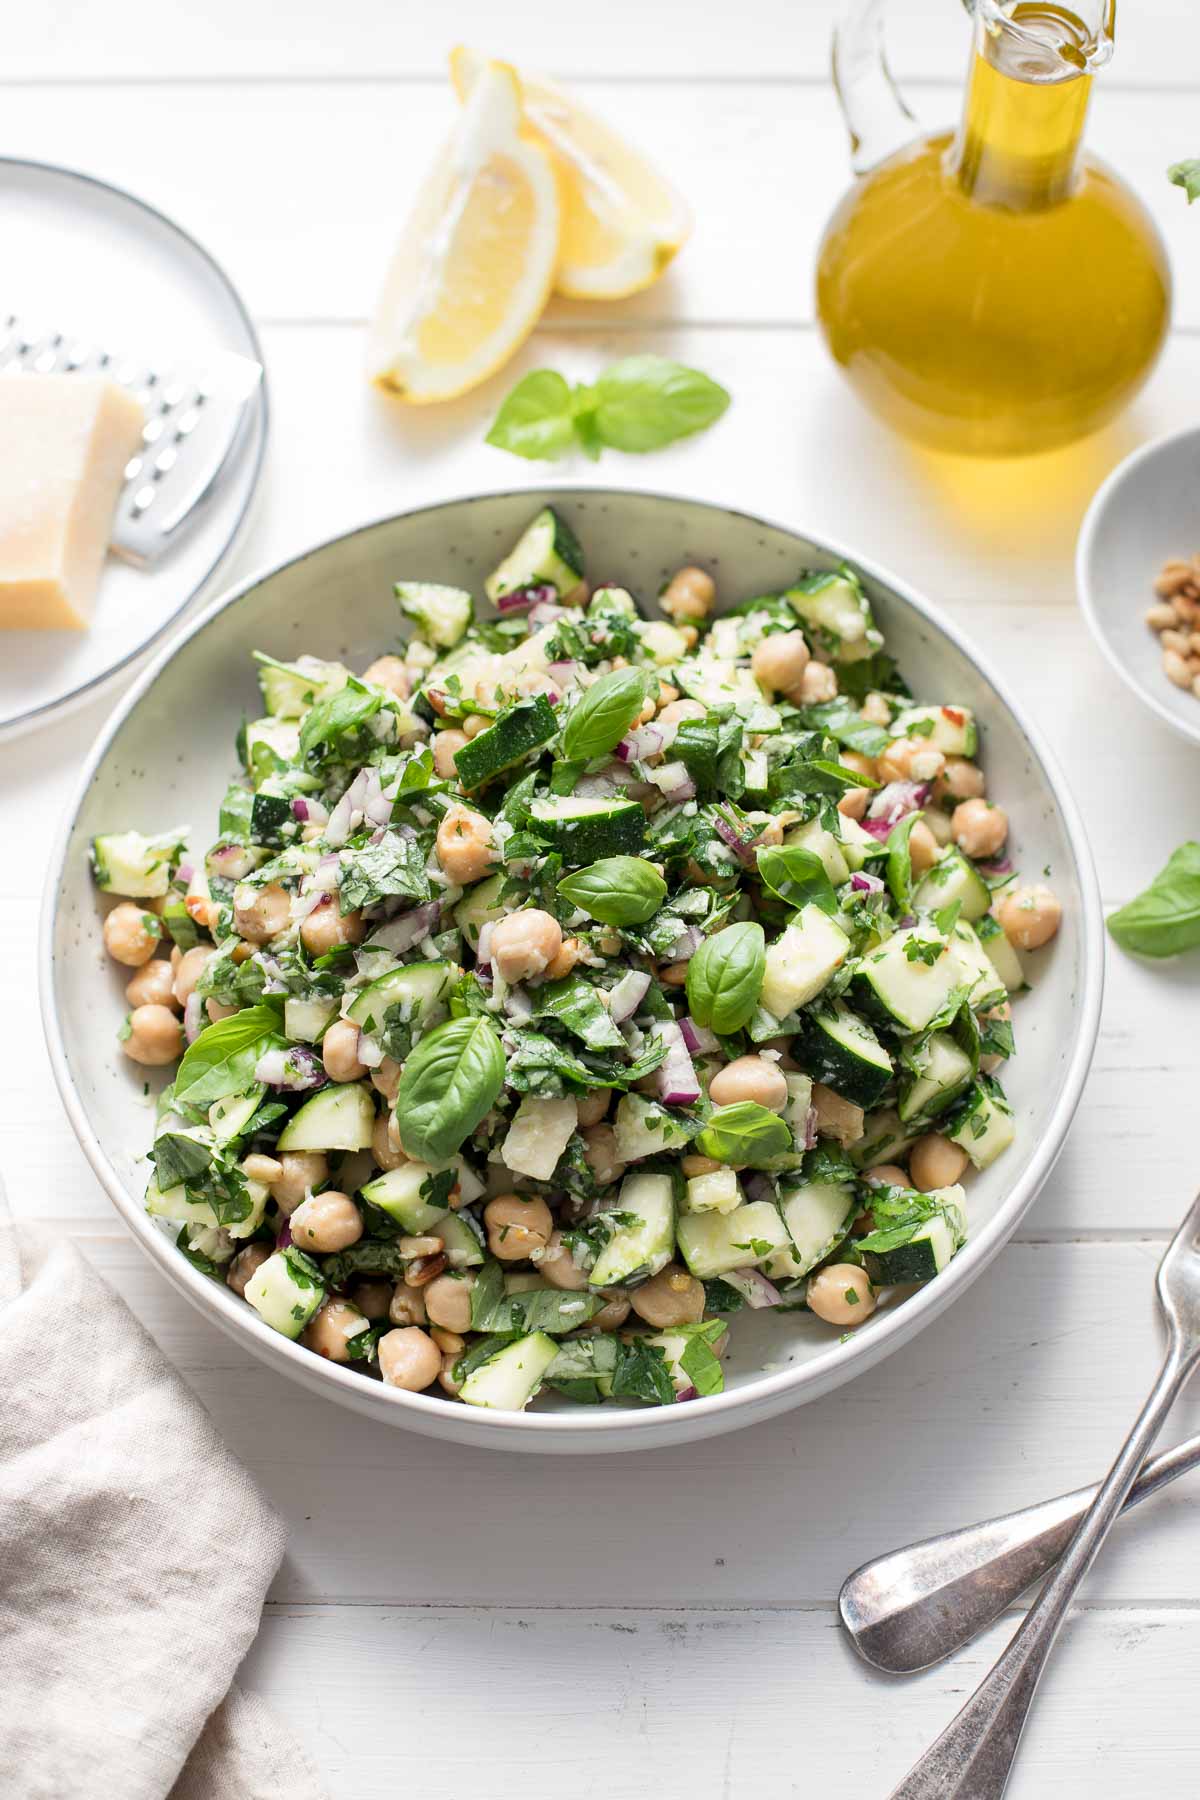 Zucchini Salad with Chickpeas, Lemon, Parmesan, and Fresh Herbs